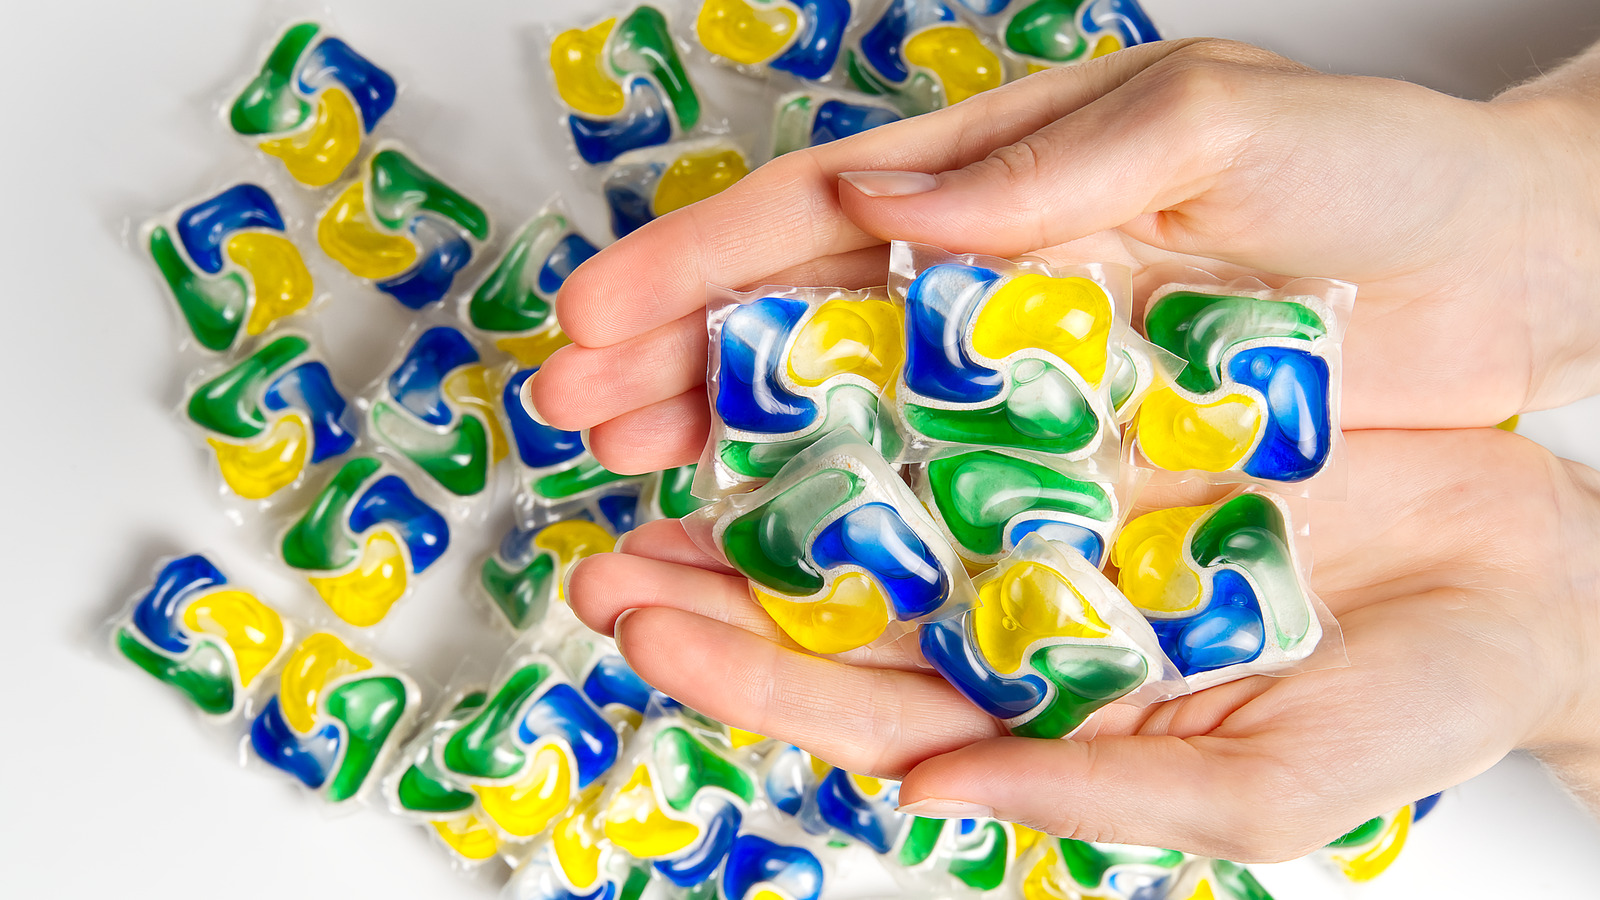 6 Reasons Your Dishwasher Tablets Aren't Dissolving